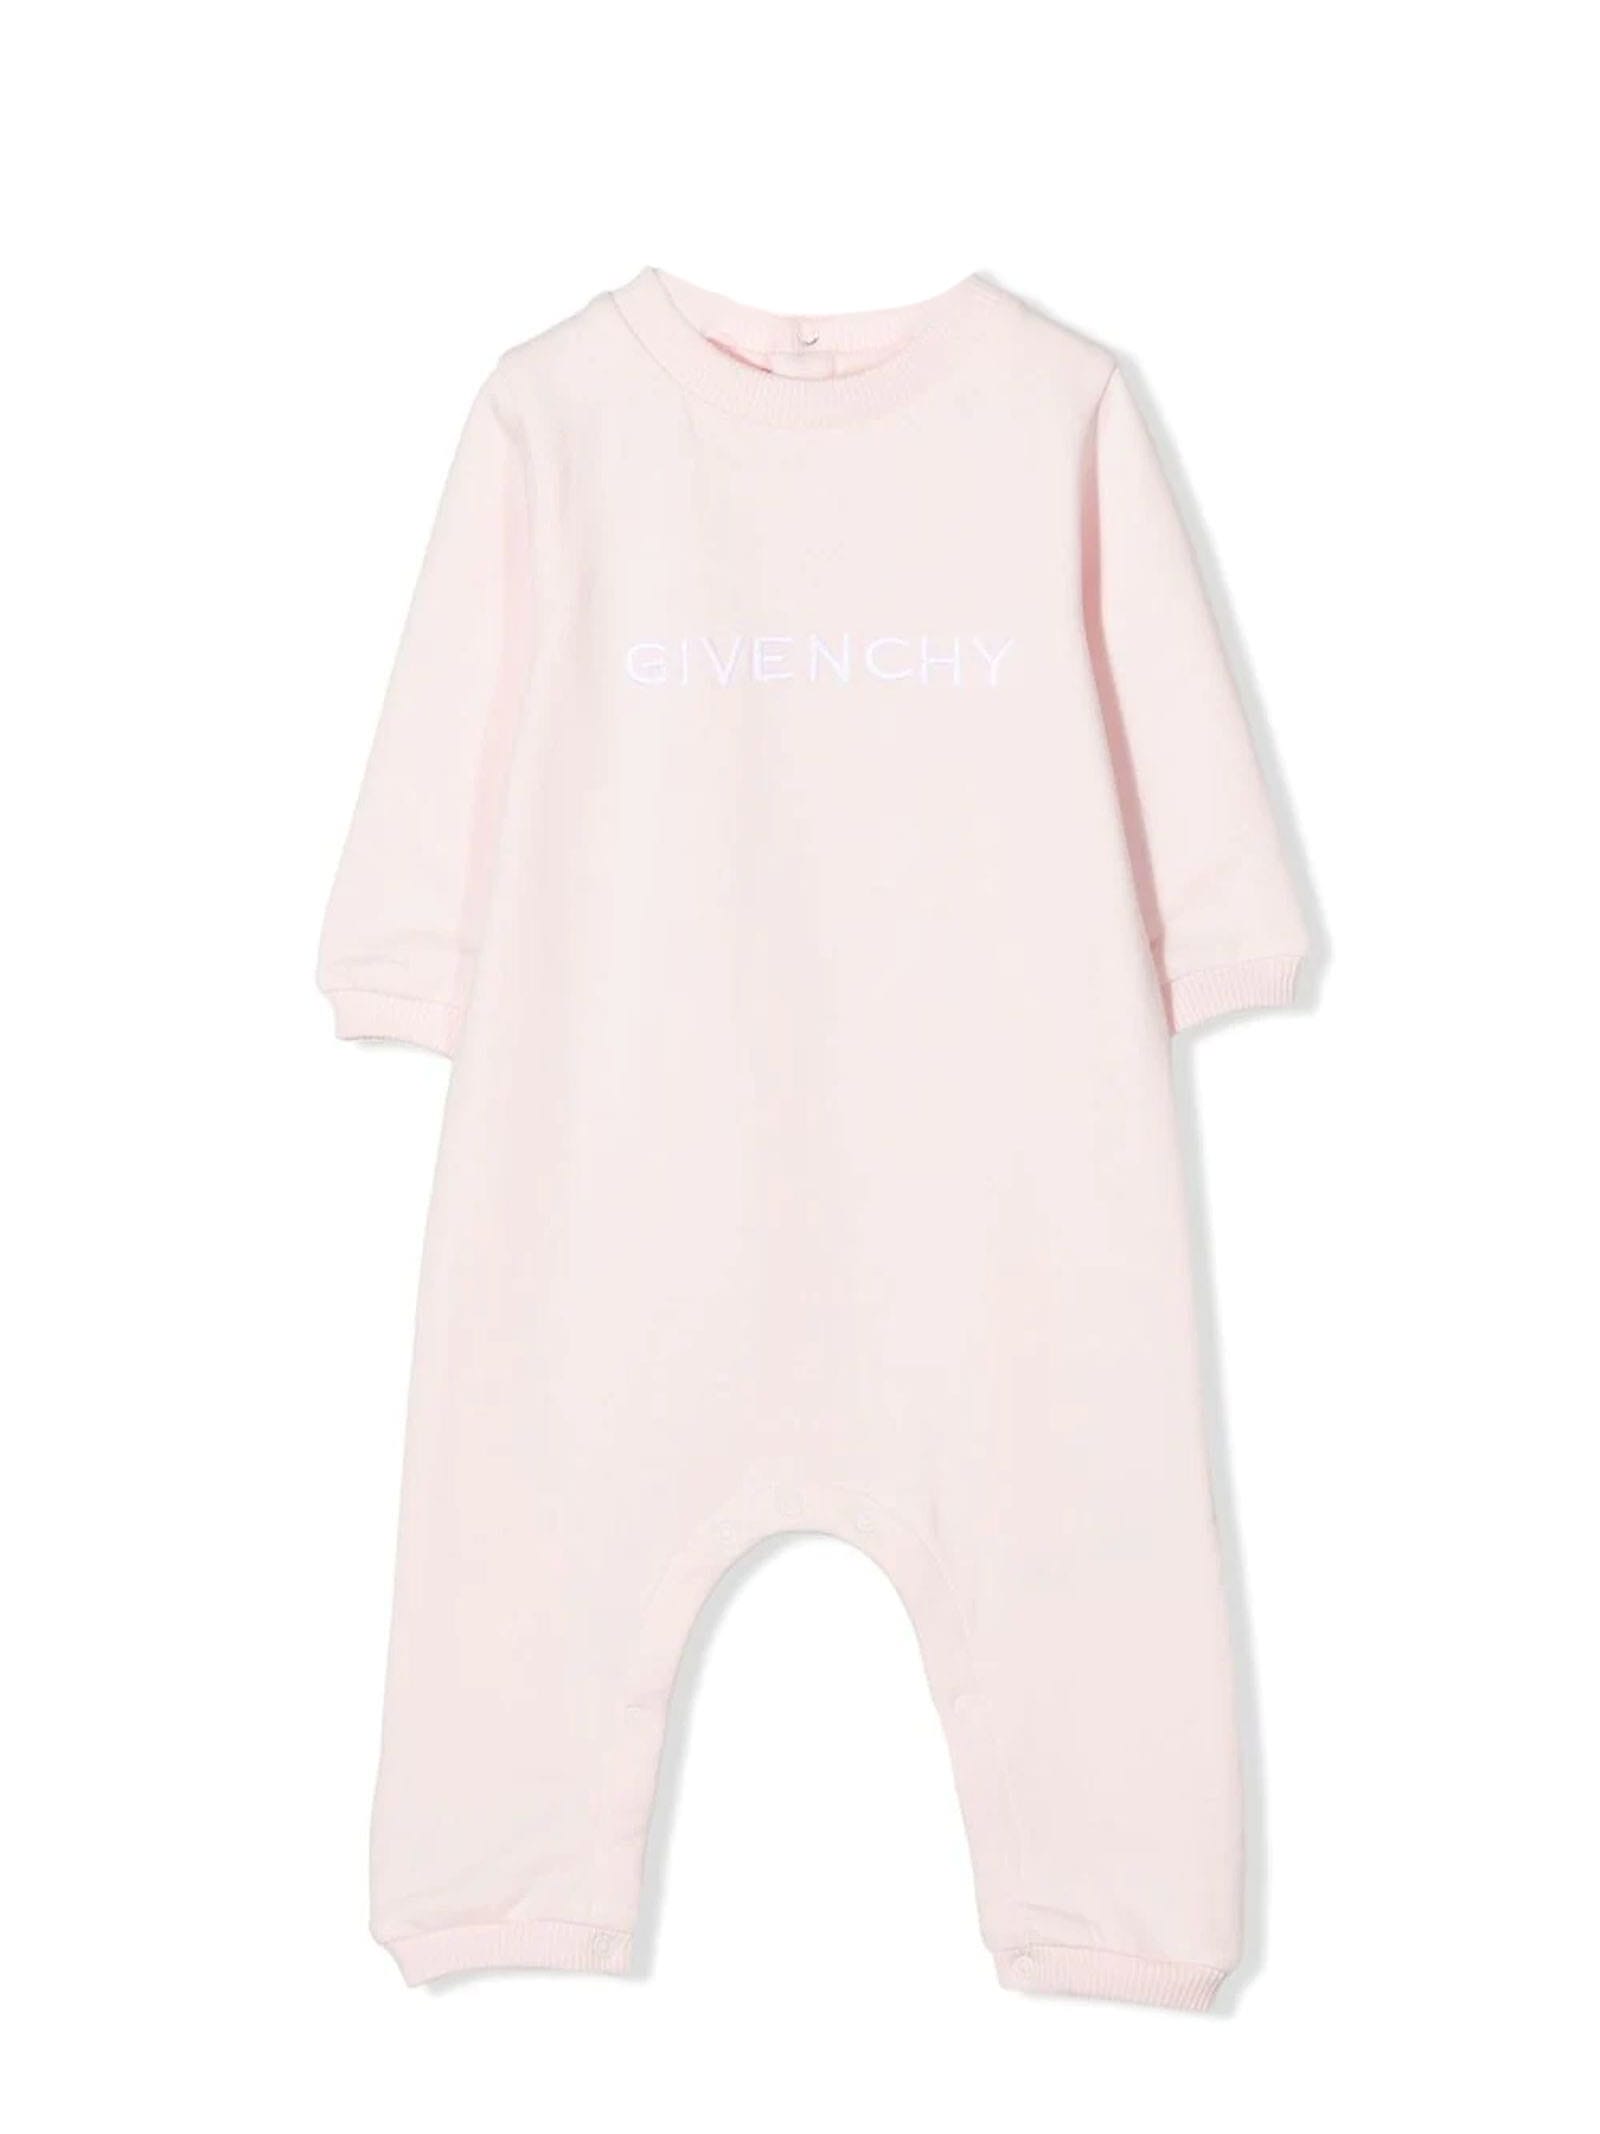 Givenchy Pink Cotton Romper